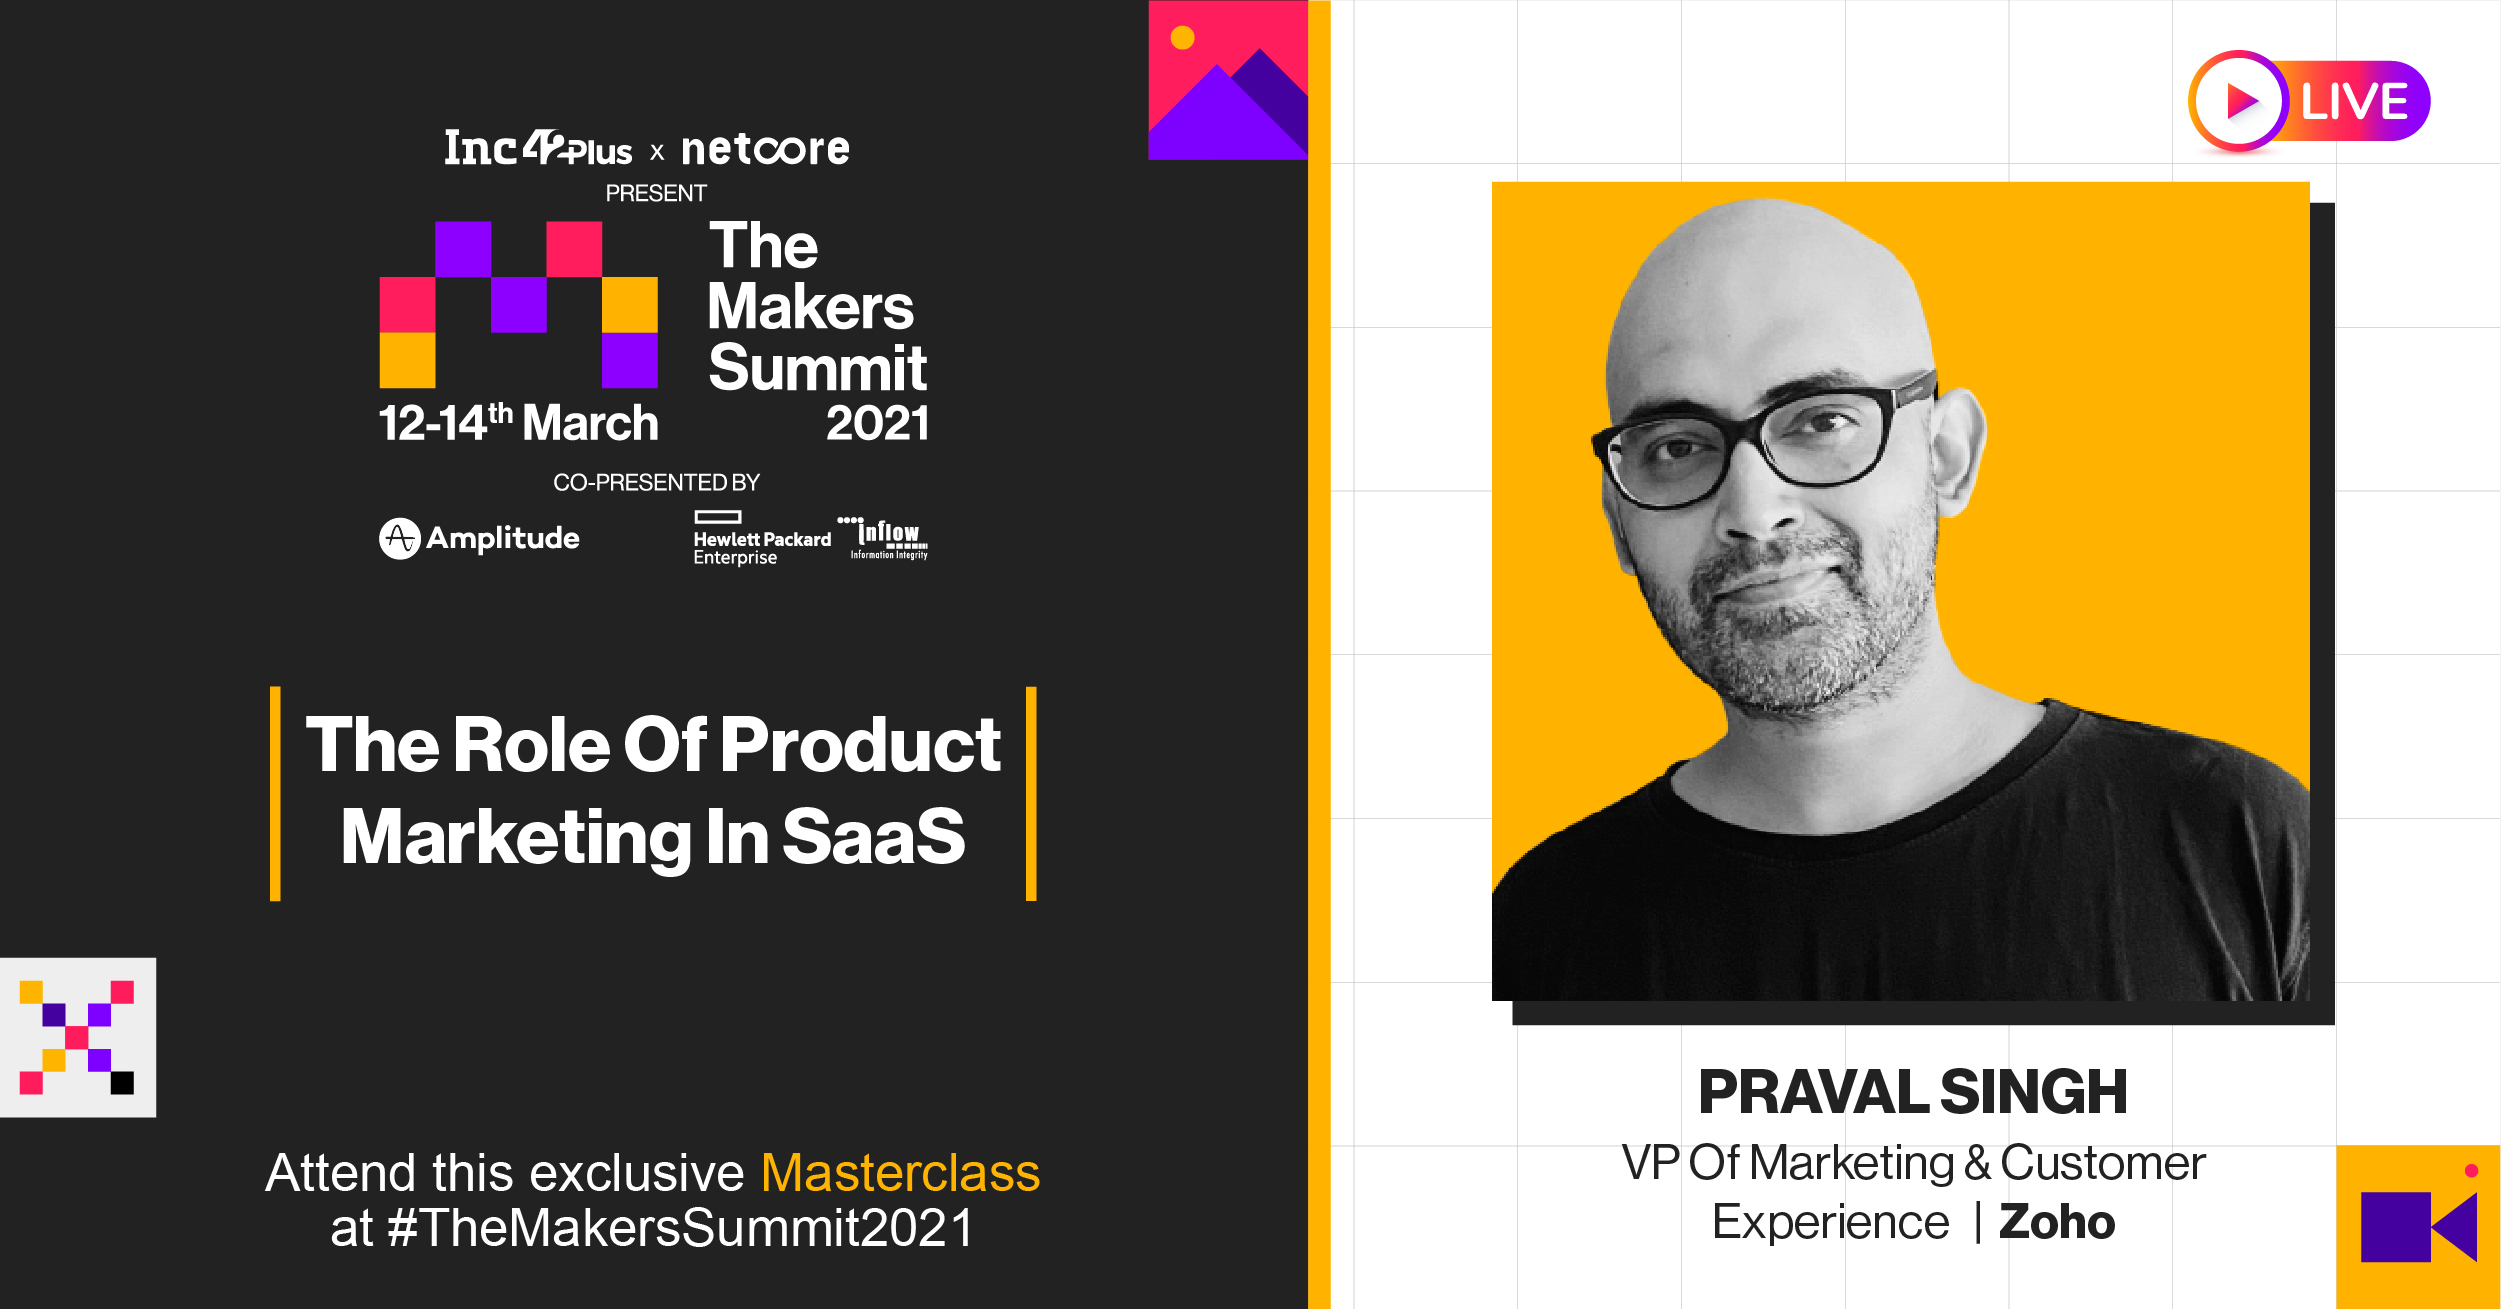 The Role Of Product Marketing In SaaS 